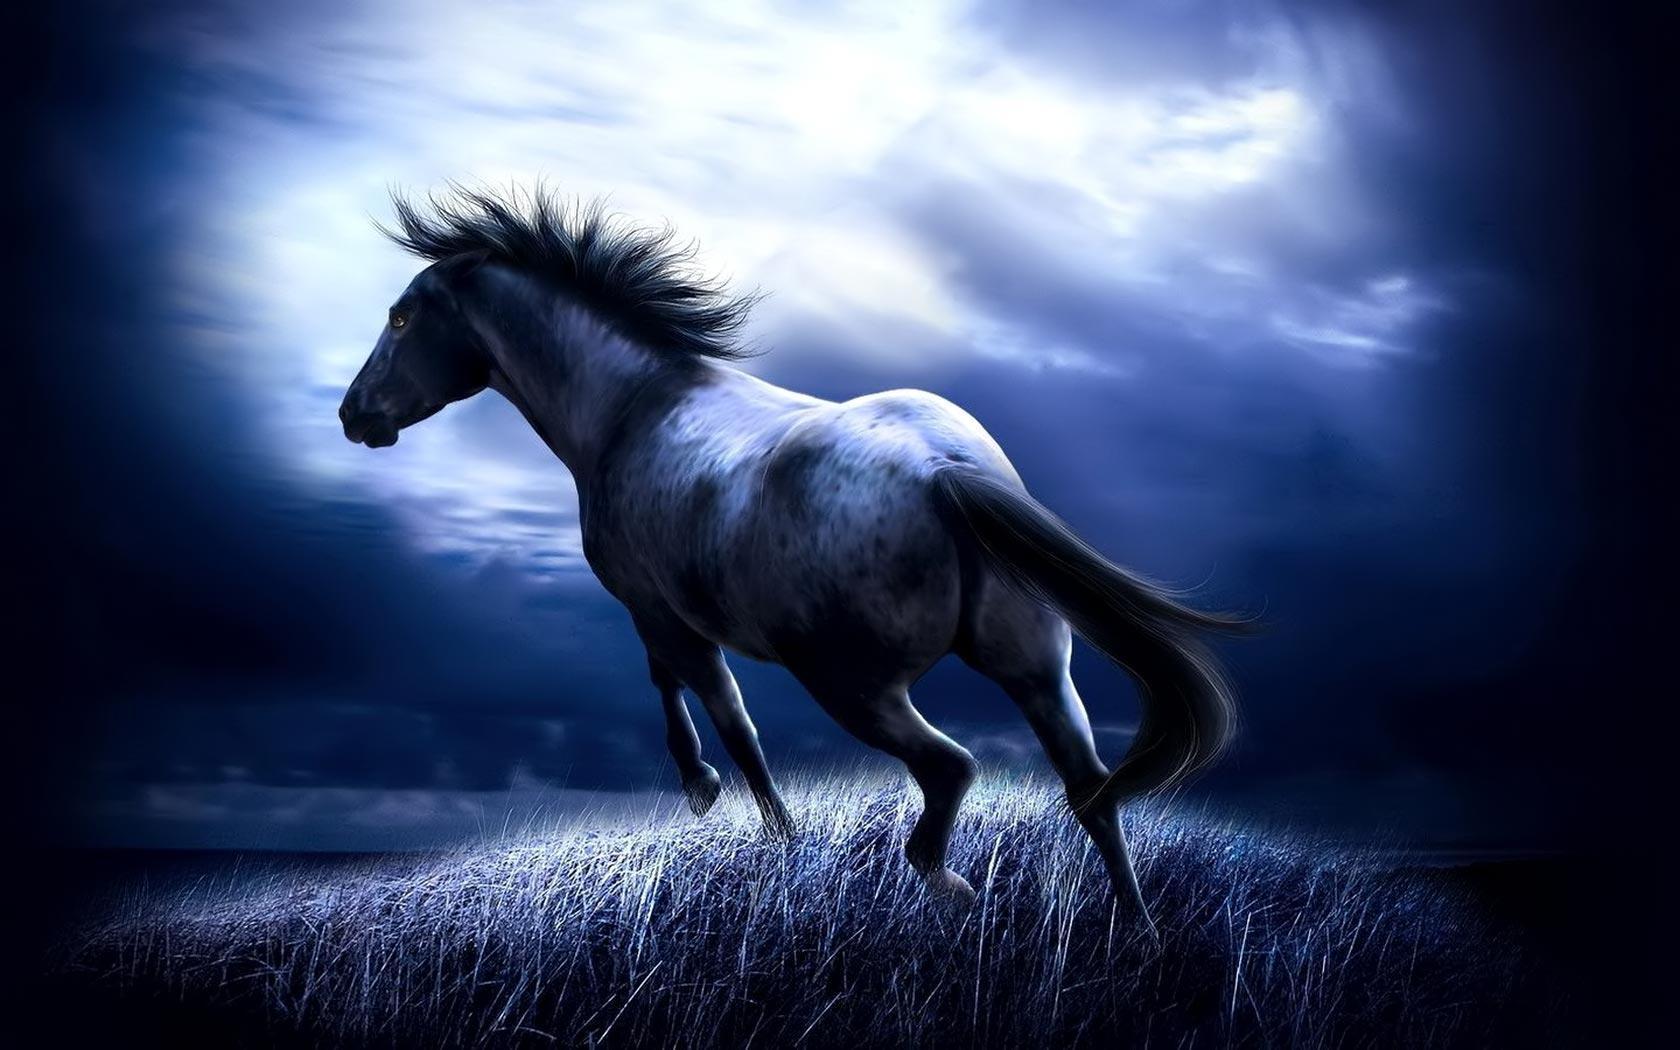 horse background for my computer - Image And Wallpaper